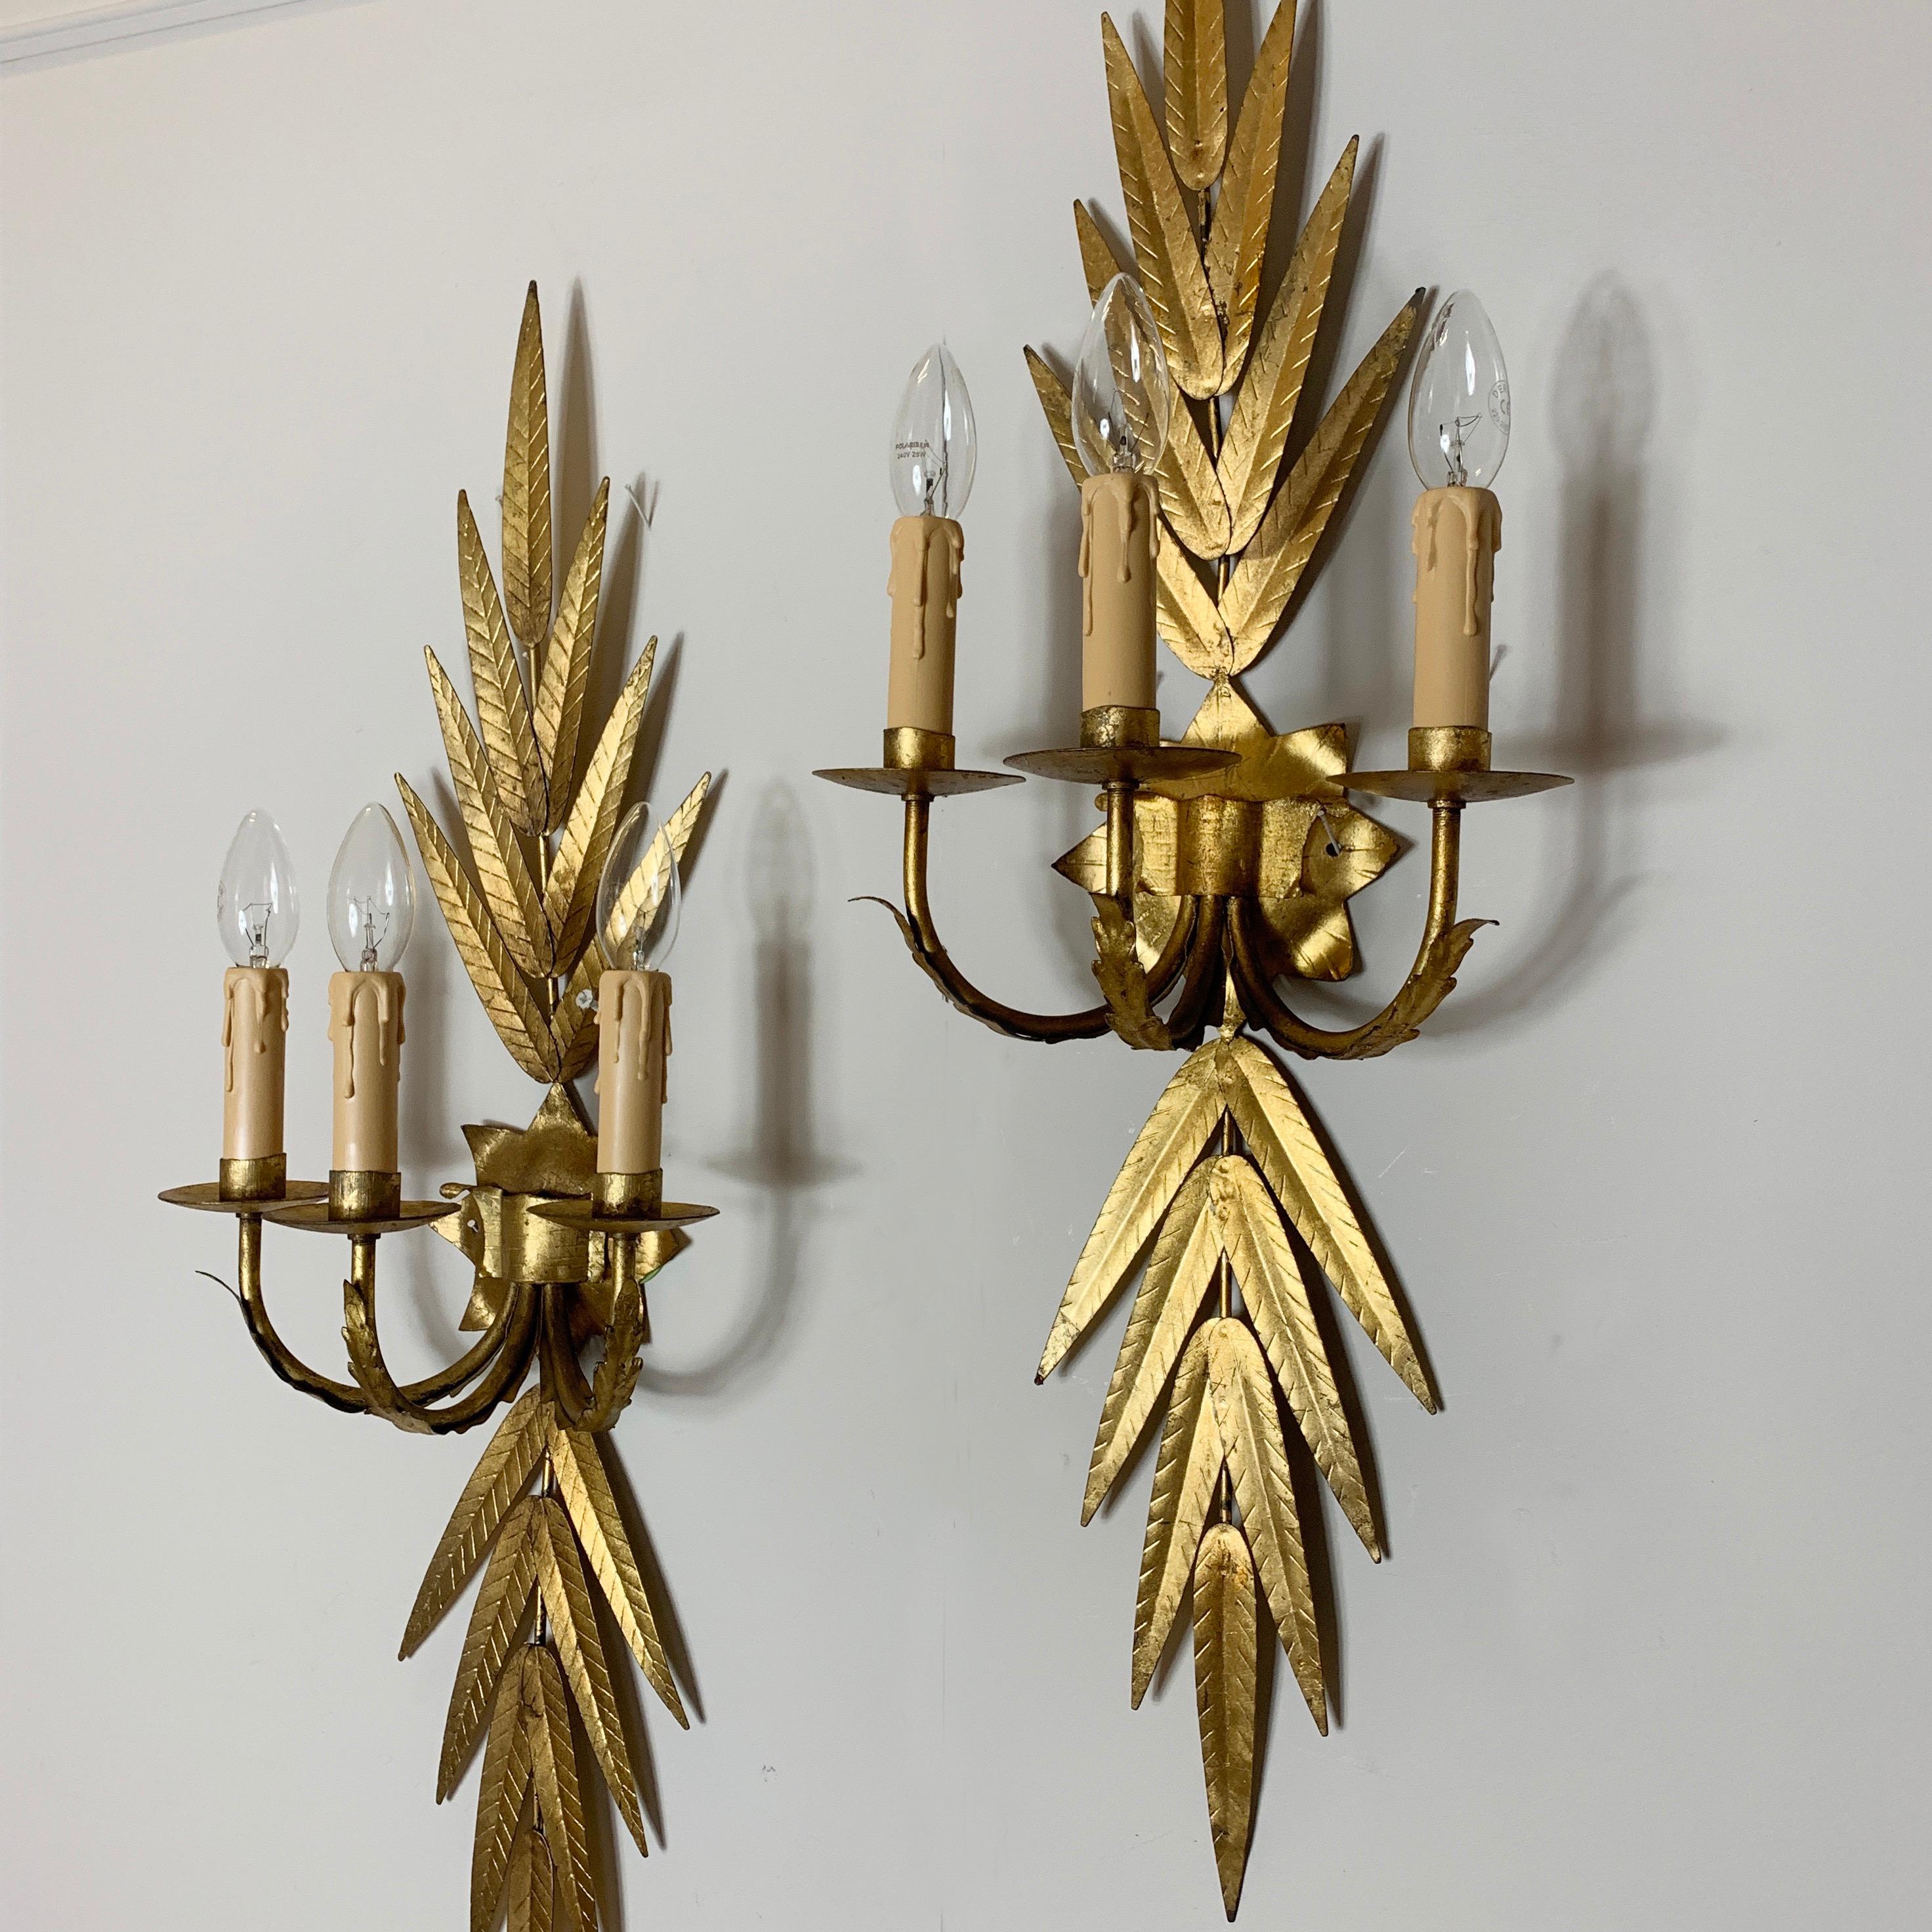 A Pair Of Large Spanish Gilt Wall Sconces att 'Ferro Art' ' Ferro Colour' Spain, 
circa 1950s
Beautiful Strong Bright Gilt Color, No Losses, Great Condition
The Lights Have Been Re-Wired And Pat Tested Ready For Use
90Cm Height, 27Cm Width, 18Cm